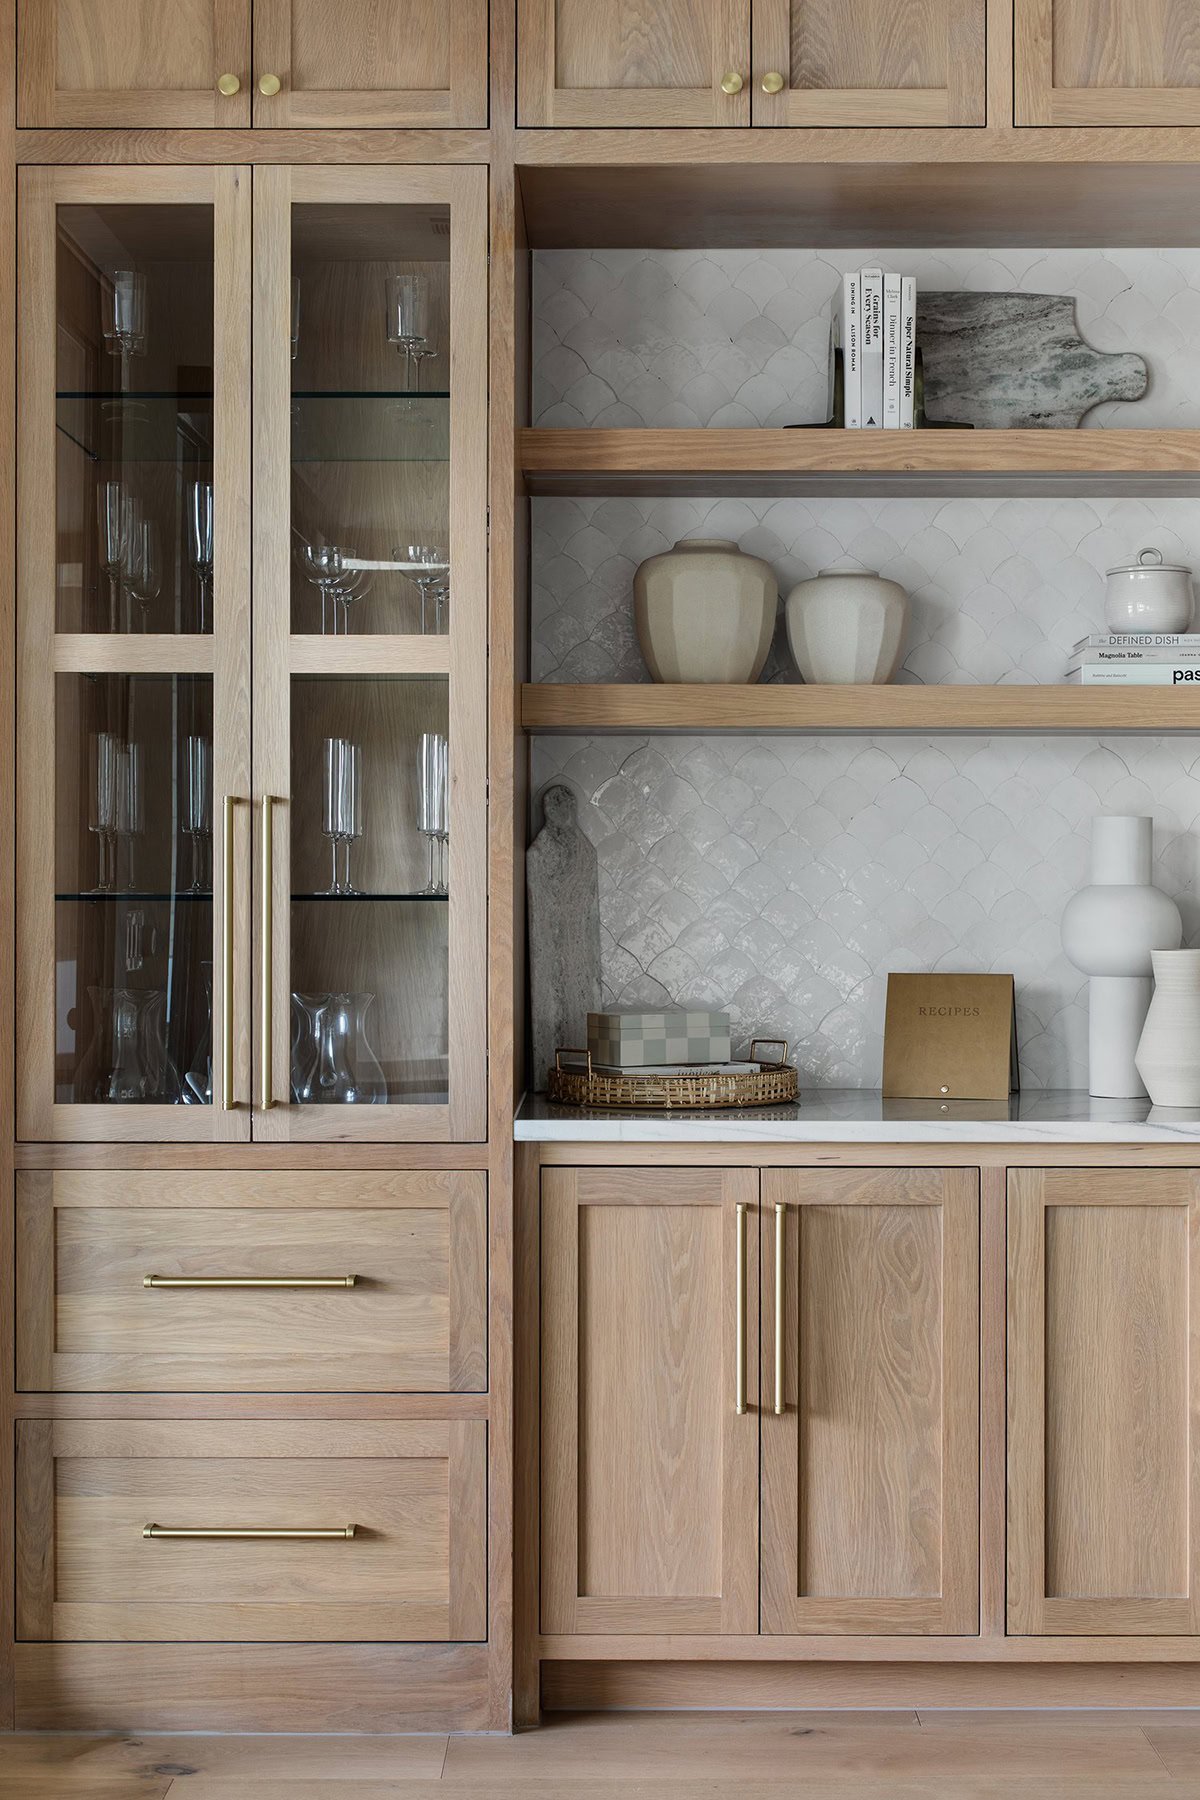 12 Beautiful Examples of Kitchens With White Oak Cabinets